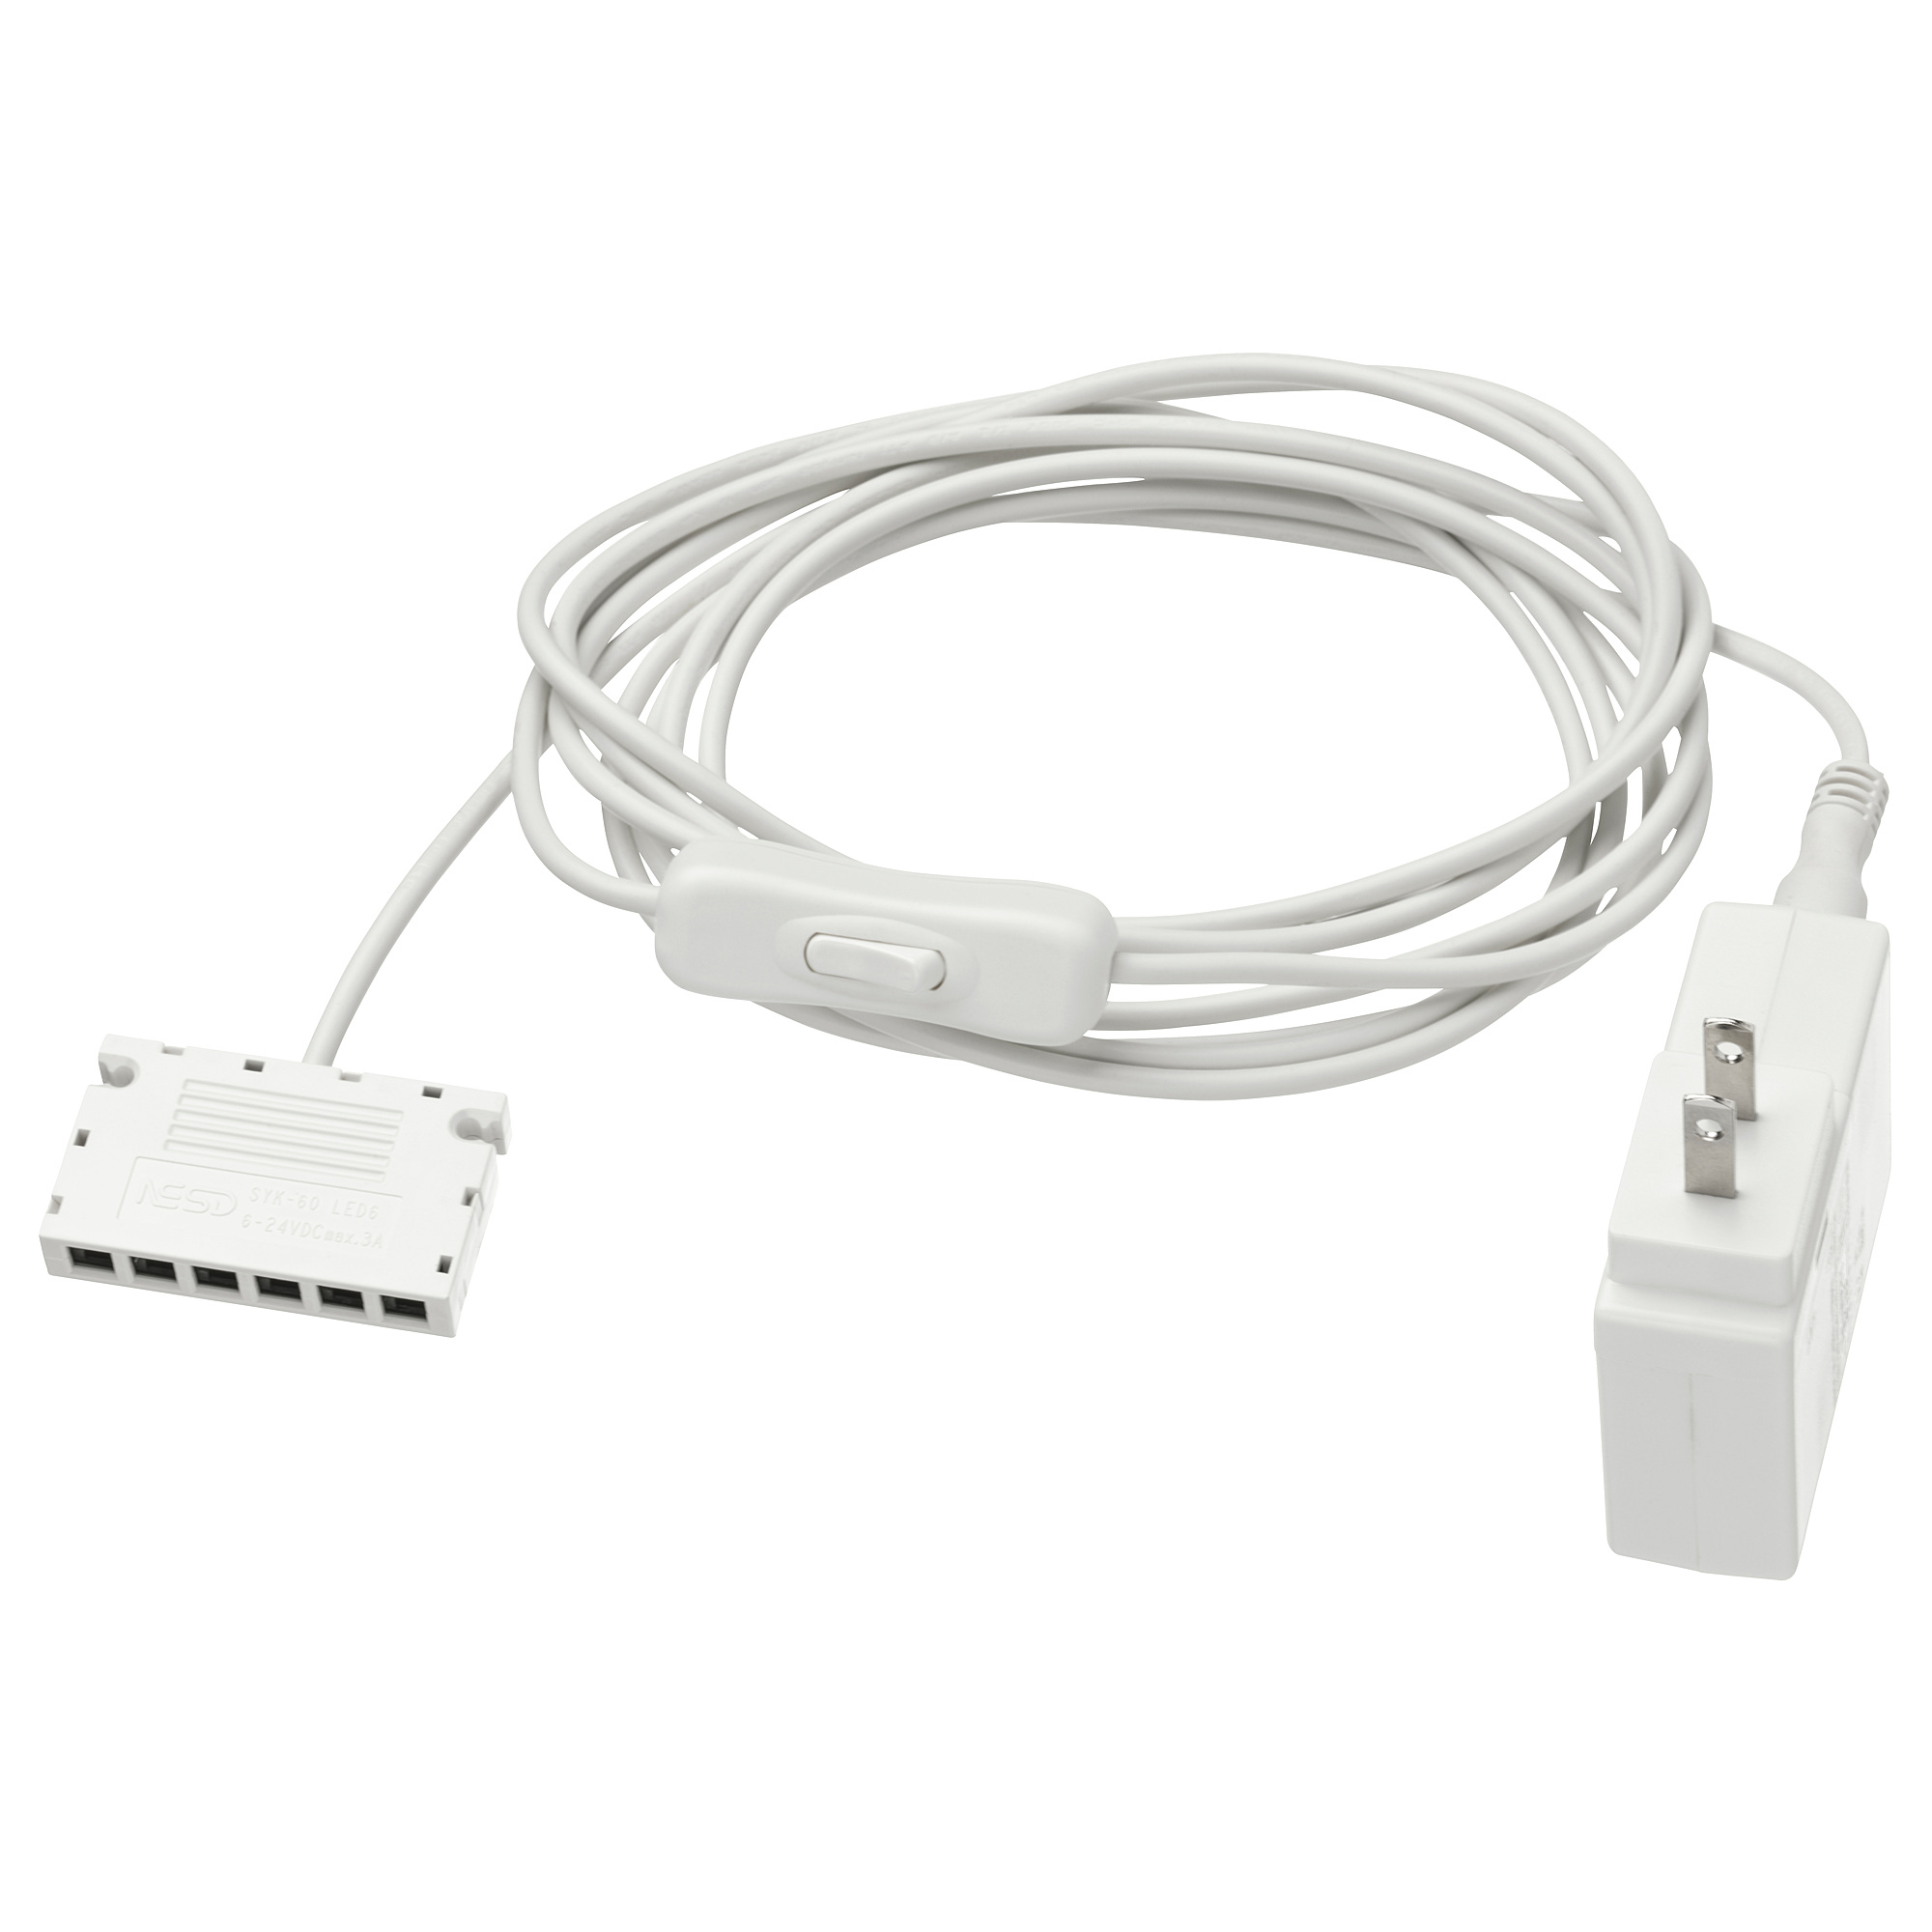 ANSLUTA LED driver with cord